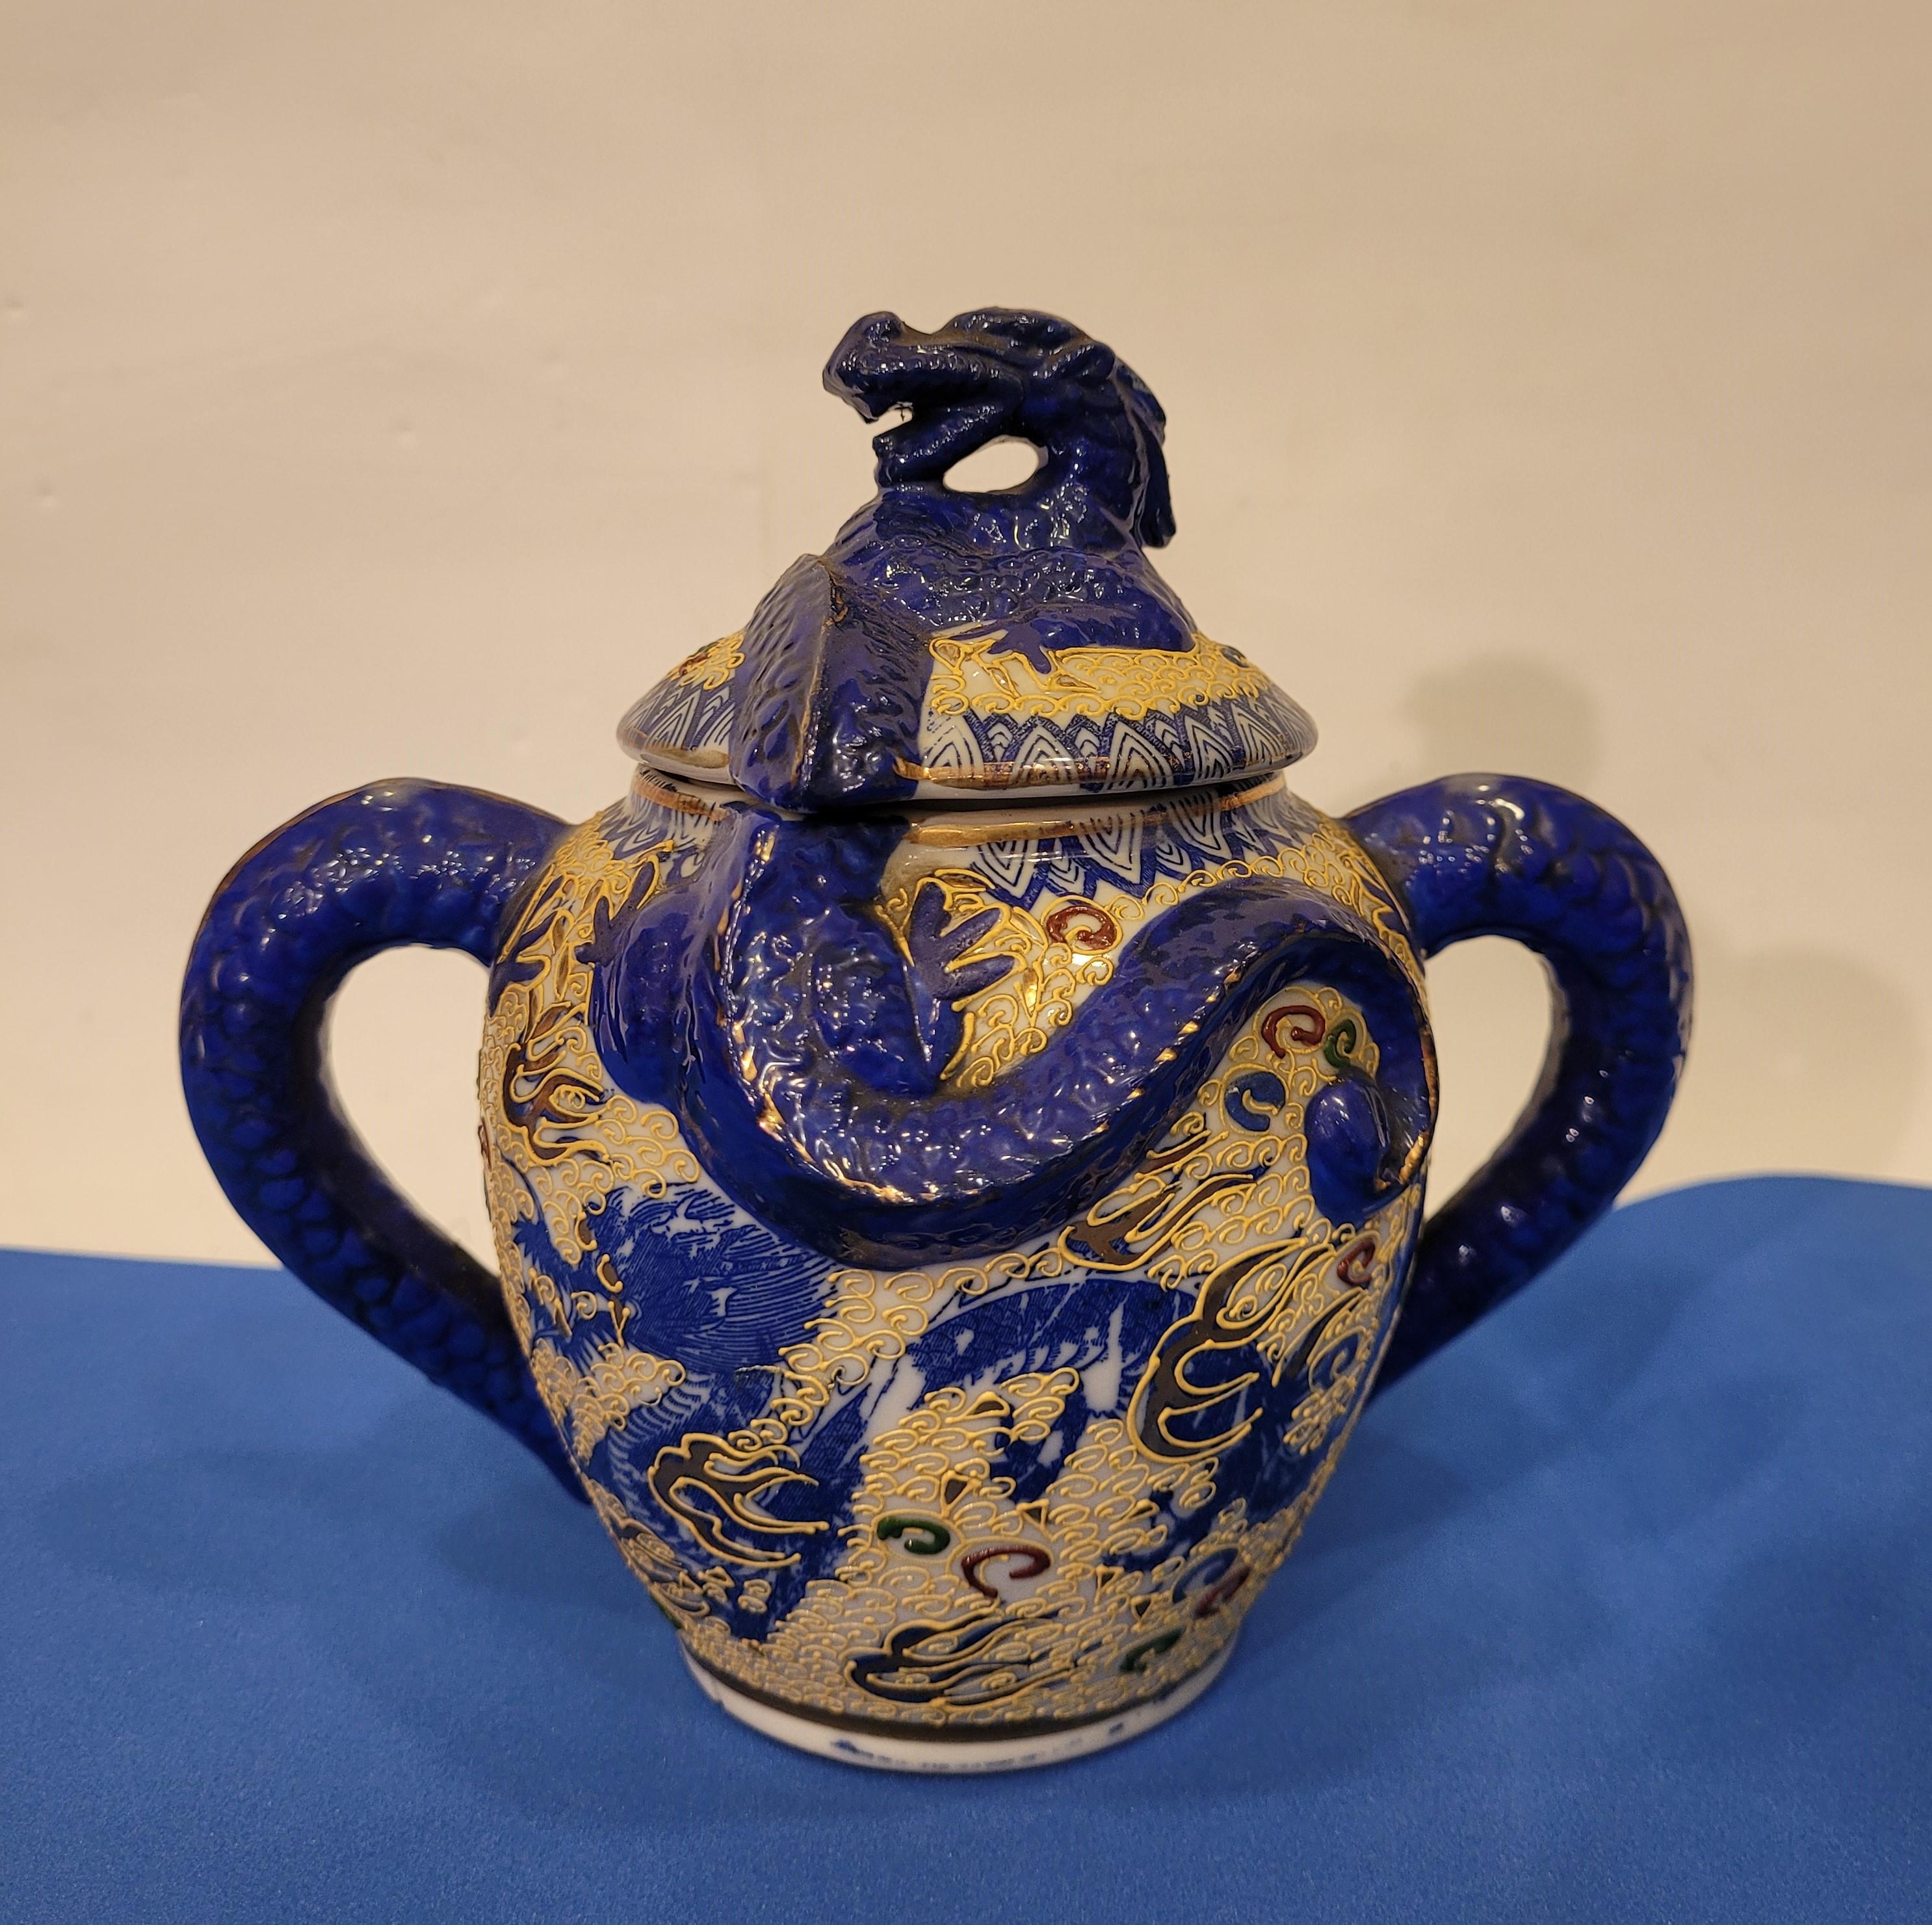 Gorgeous Satsuma porcelain set consisting of a teapot service, milk and sugar bowl, and five cup and saucer stations, all in a deep lapis lazuli blue. Satsuma porcelain is made throughout the Meiji Period between 1868 and 1912 in Japan.

It is an